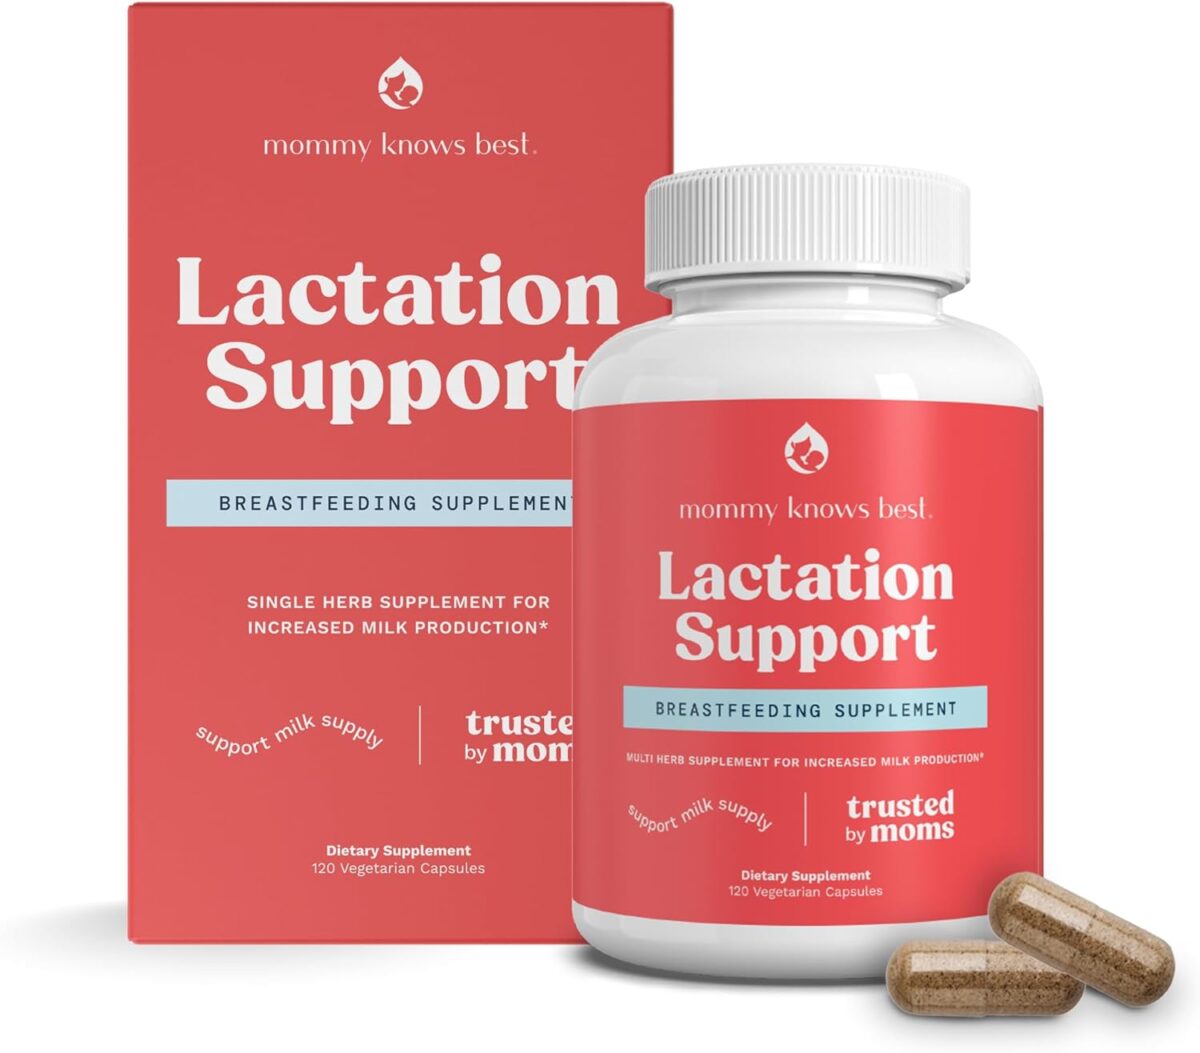 mama knows best lactation support